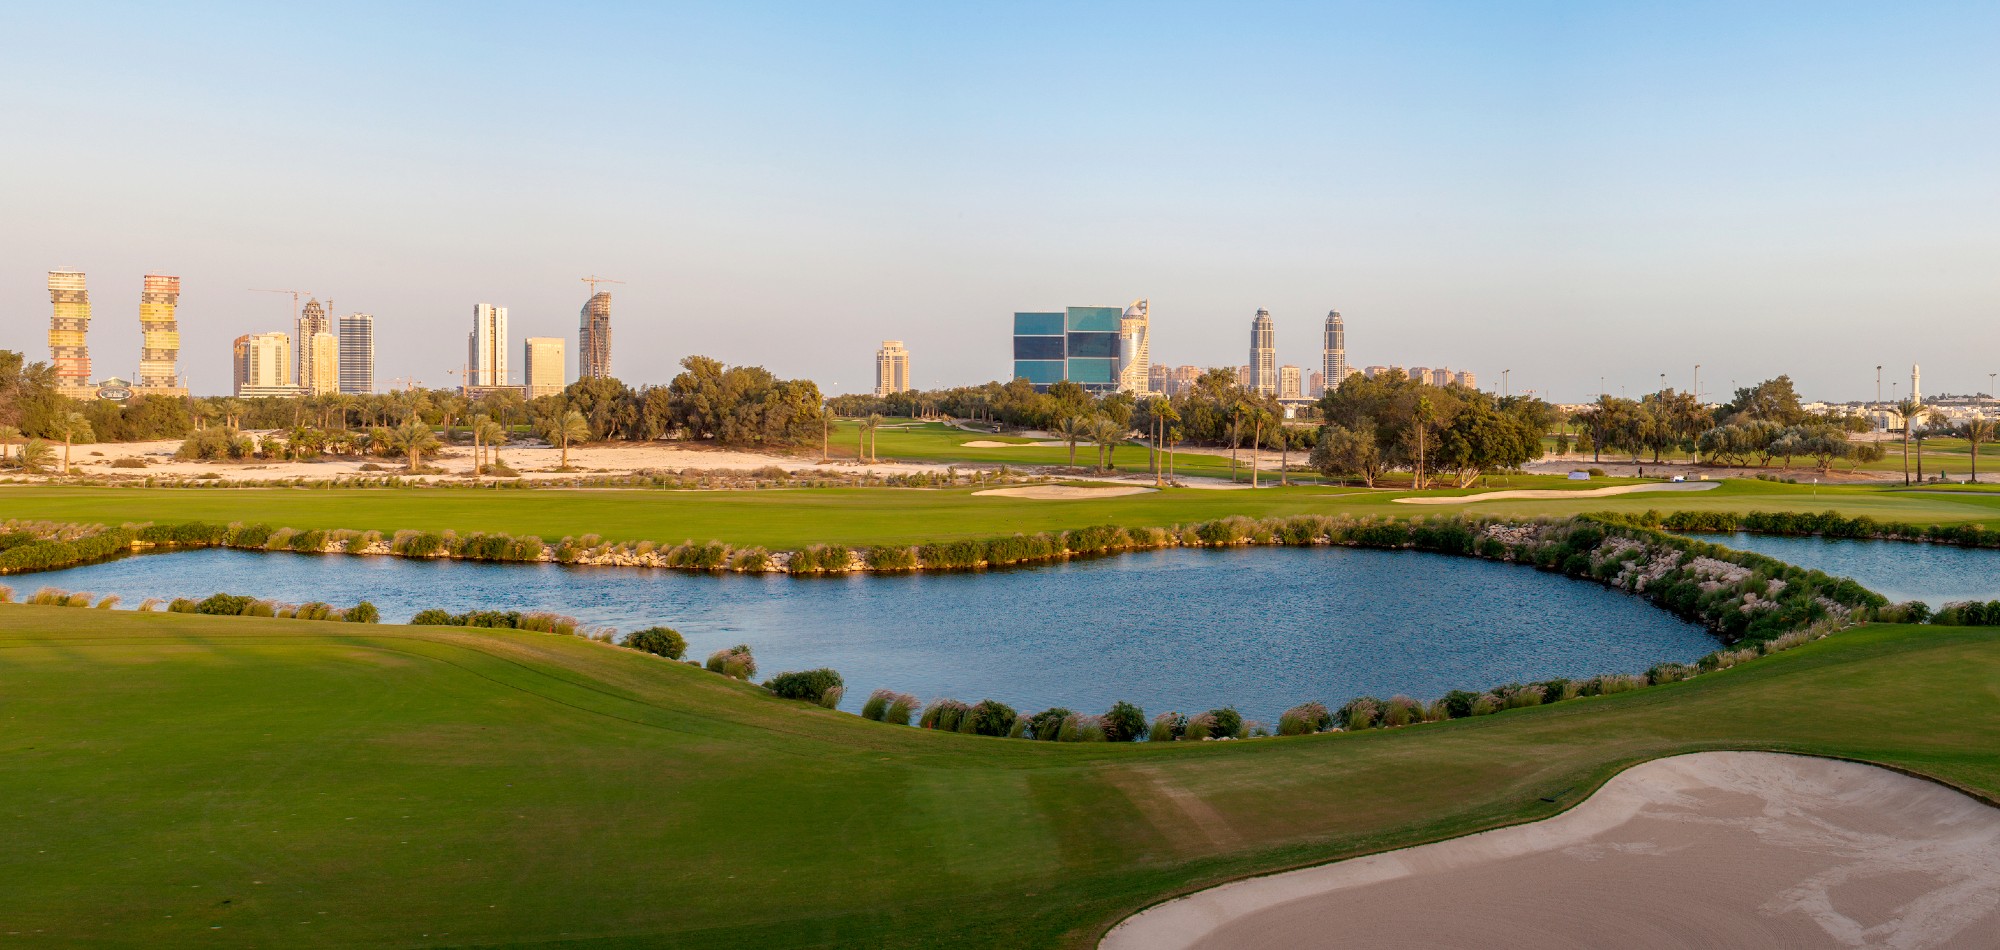 Stage set for the 36th WAGR Qatar Open Golf Amateur Championship